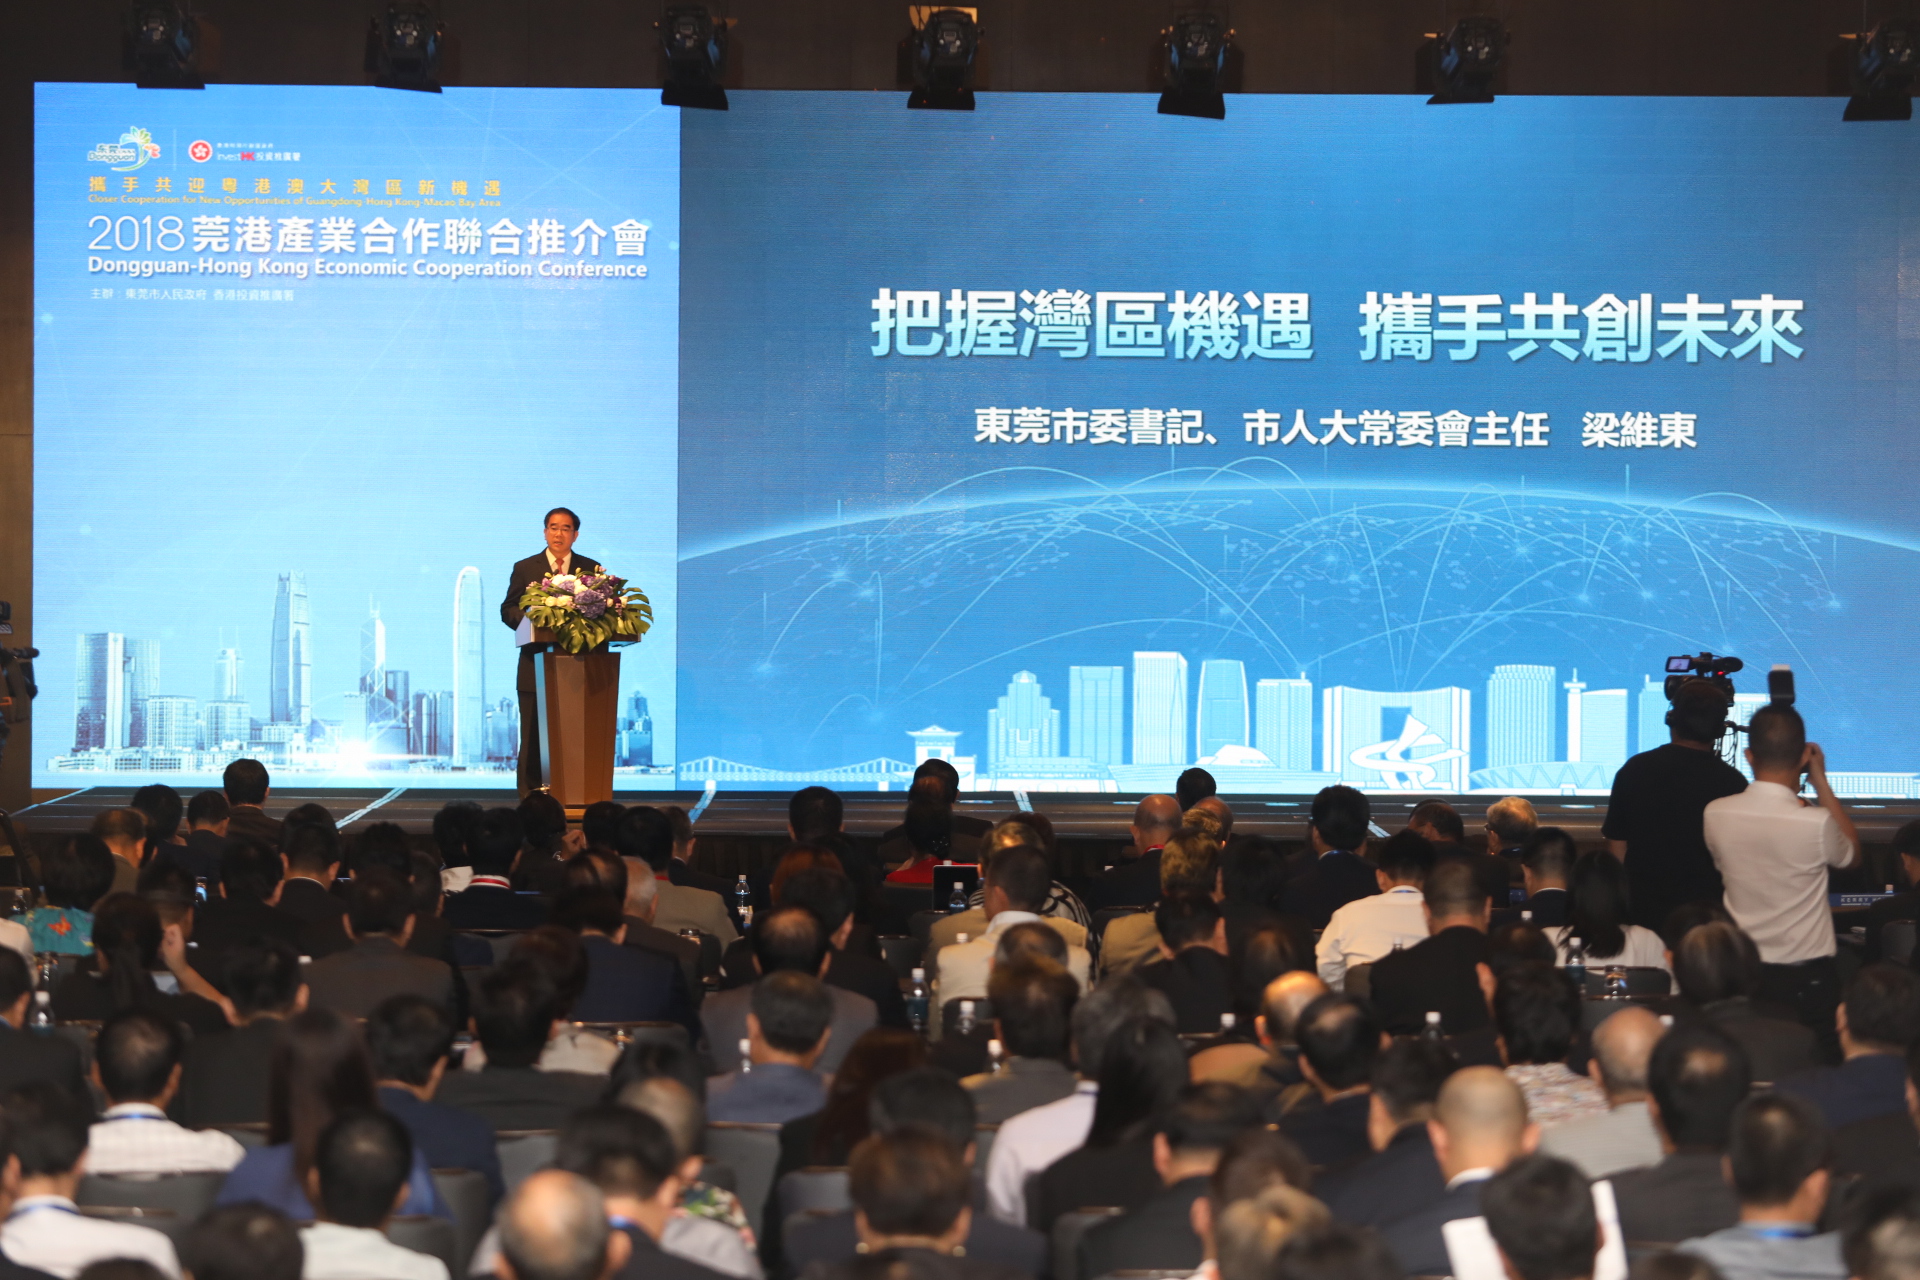 Around 800 participants including senior officials of the both governments and top executives of companies from both Hong Kong and Dongguan attended the Dongguan promotion seminar on Friday in Hong Kong